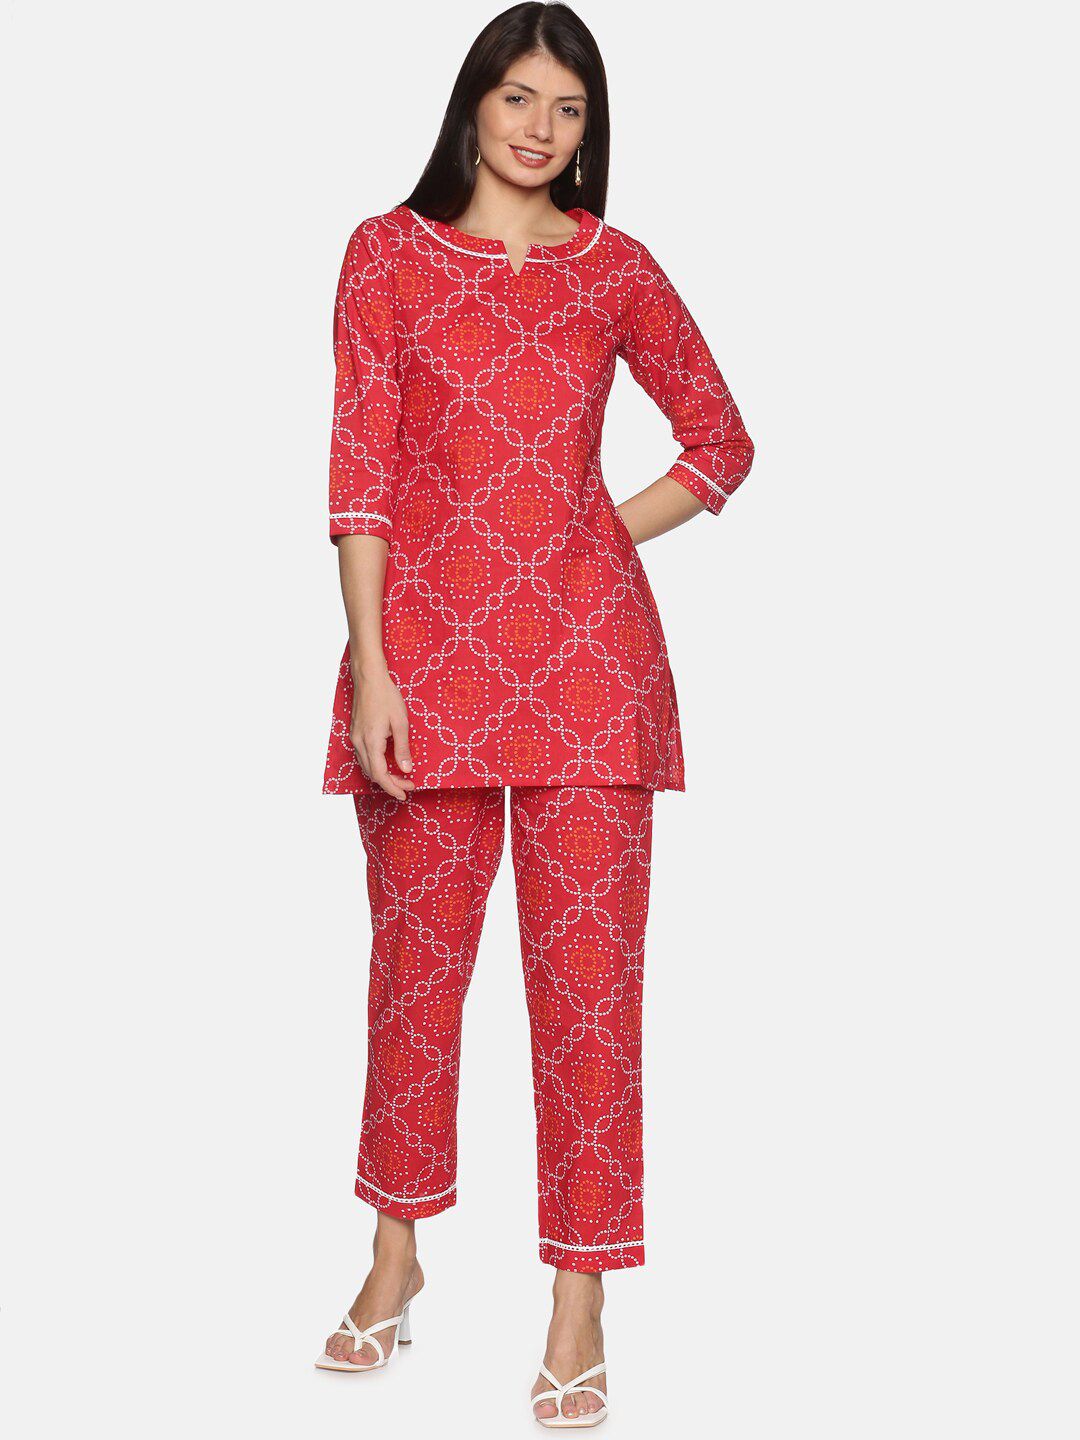 Palakh Women Red & White Printed Night suit Price in India